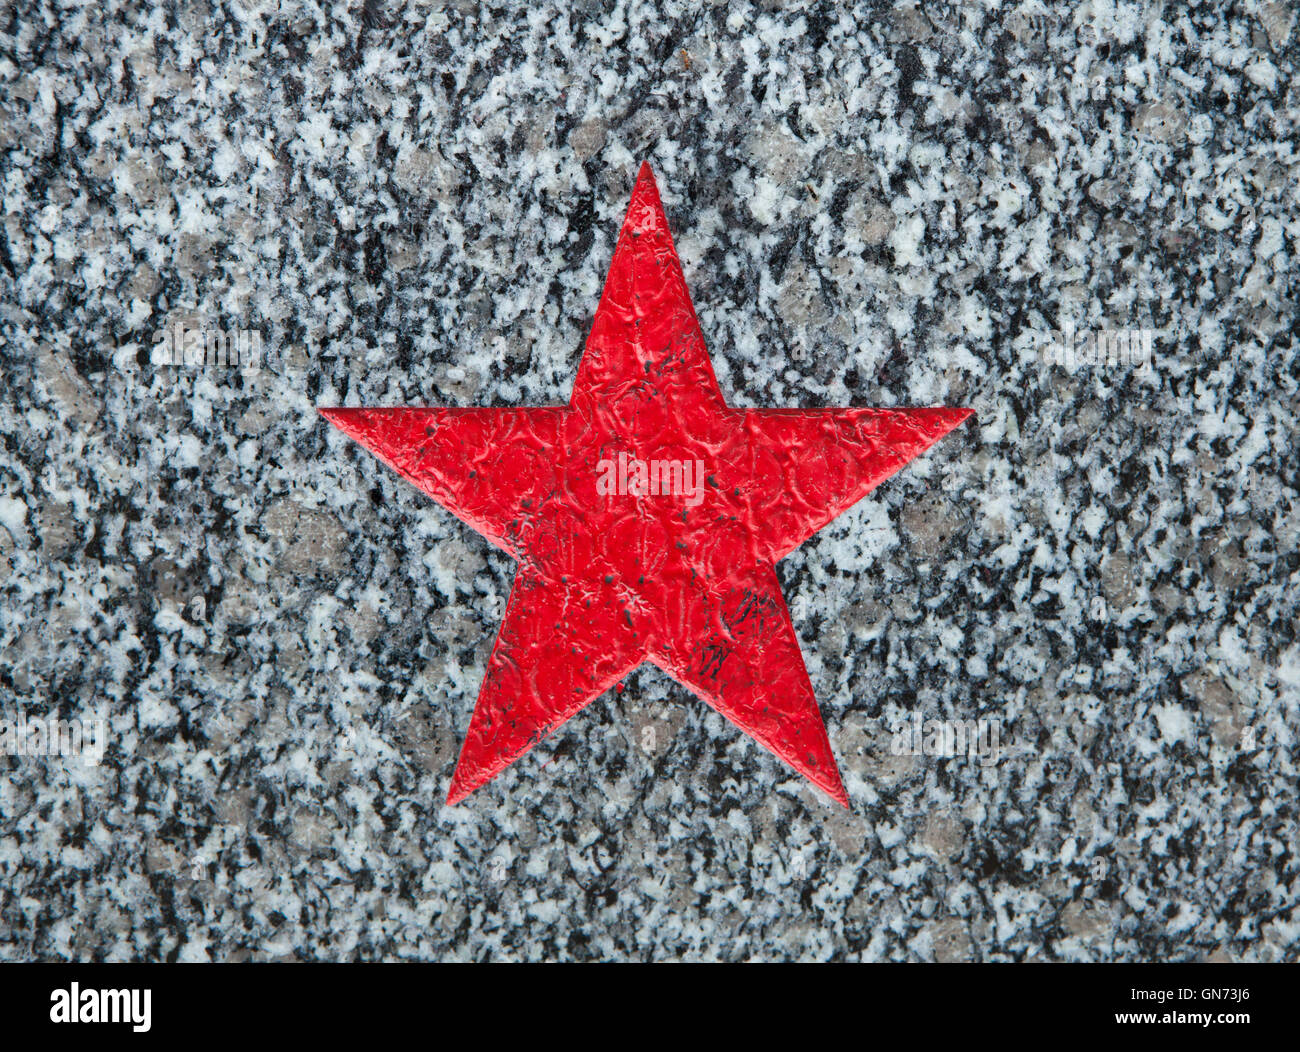 Red star depicted on the Soviet War Memorial at the Town Cemetery in Roudnice nad Labem in Central Bohemia, Czech Republic. Stock Photo